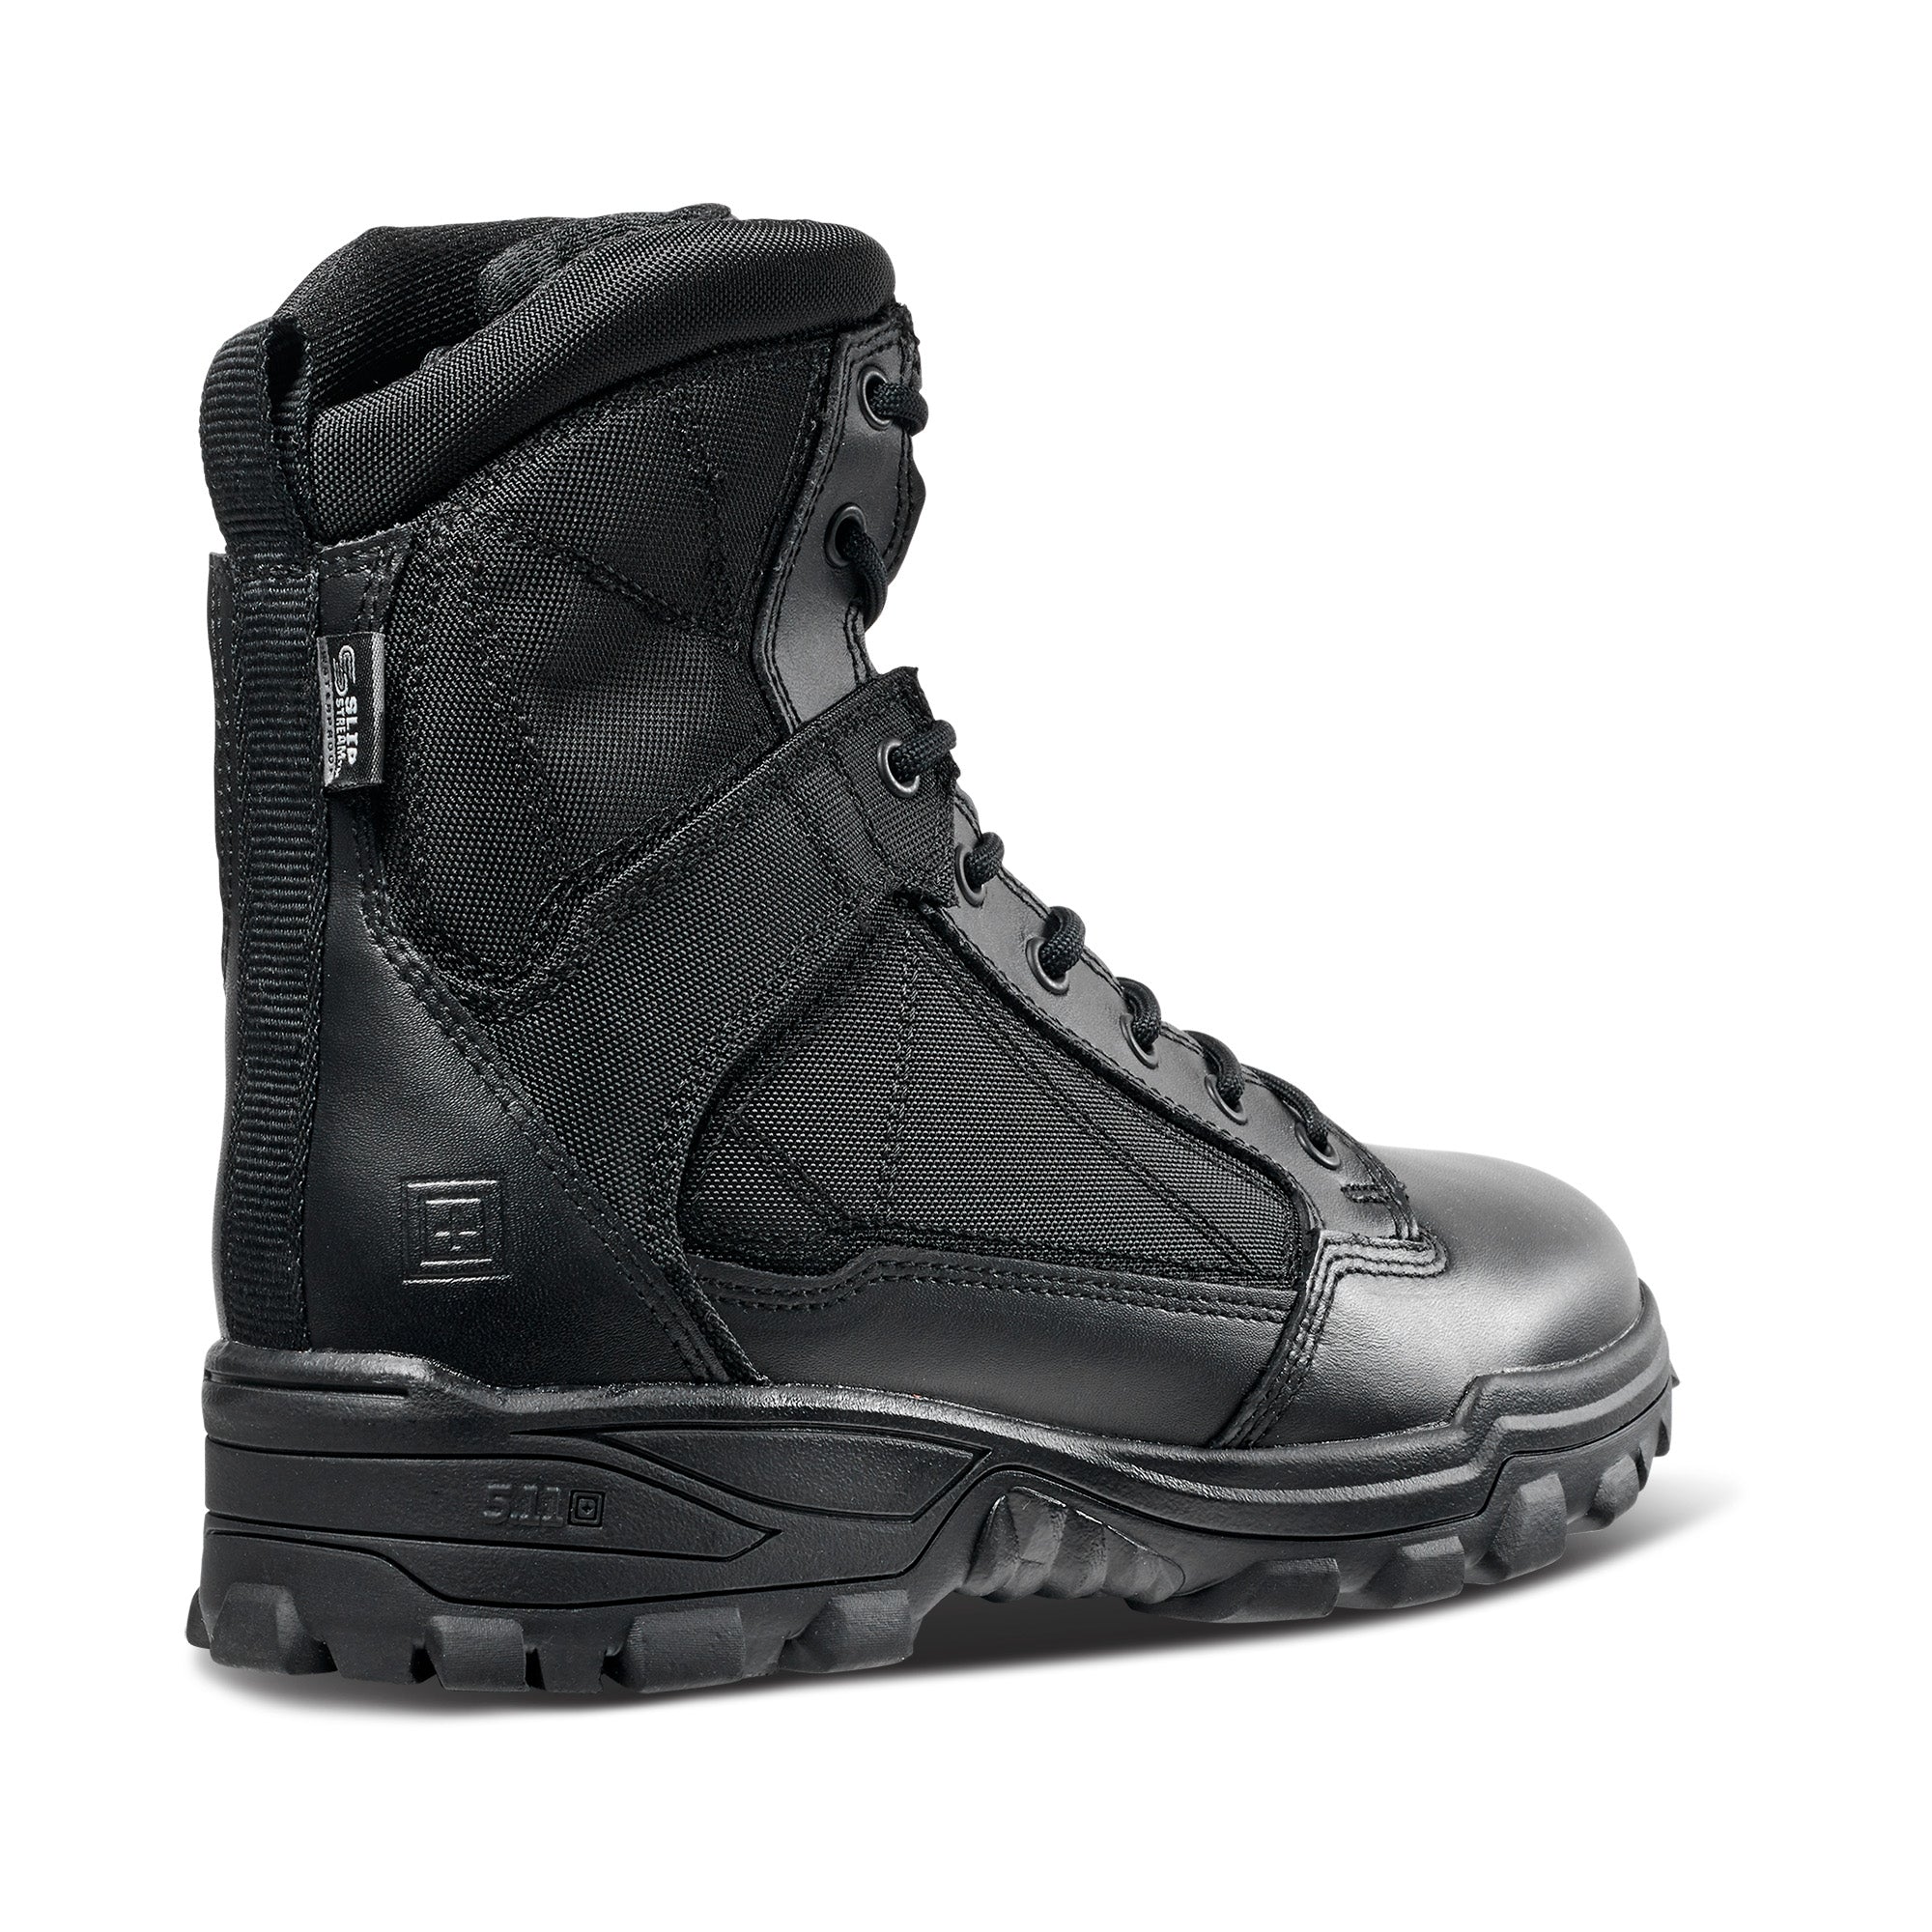 5.11 Tactical Fast-Tac Waterproof 6" Boots